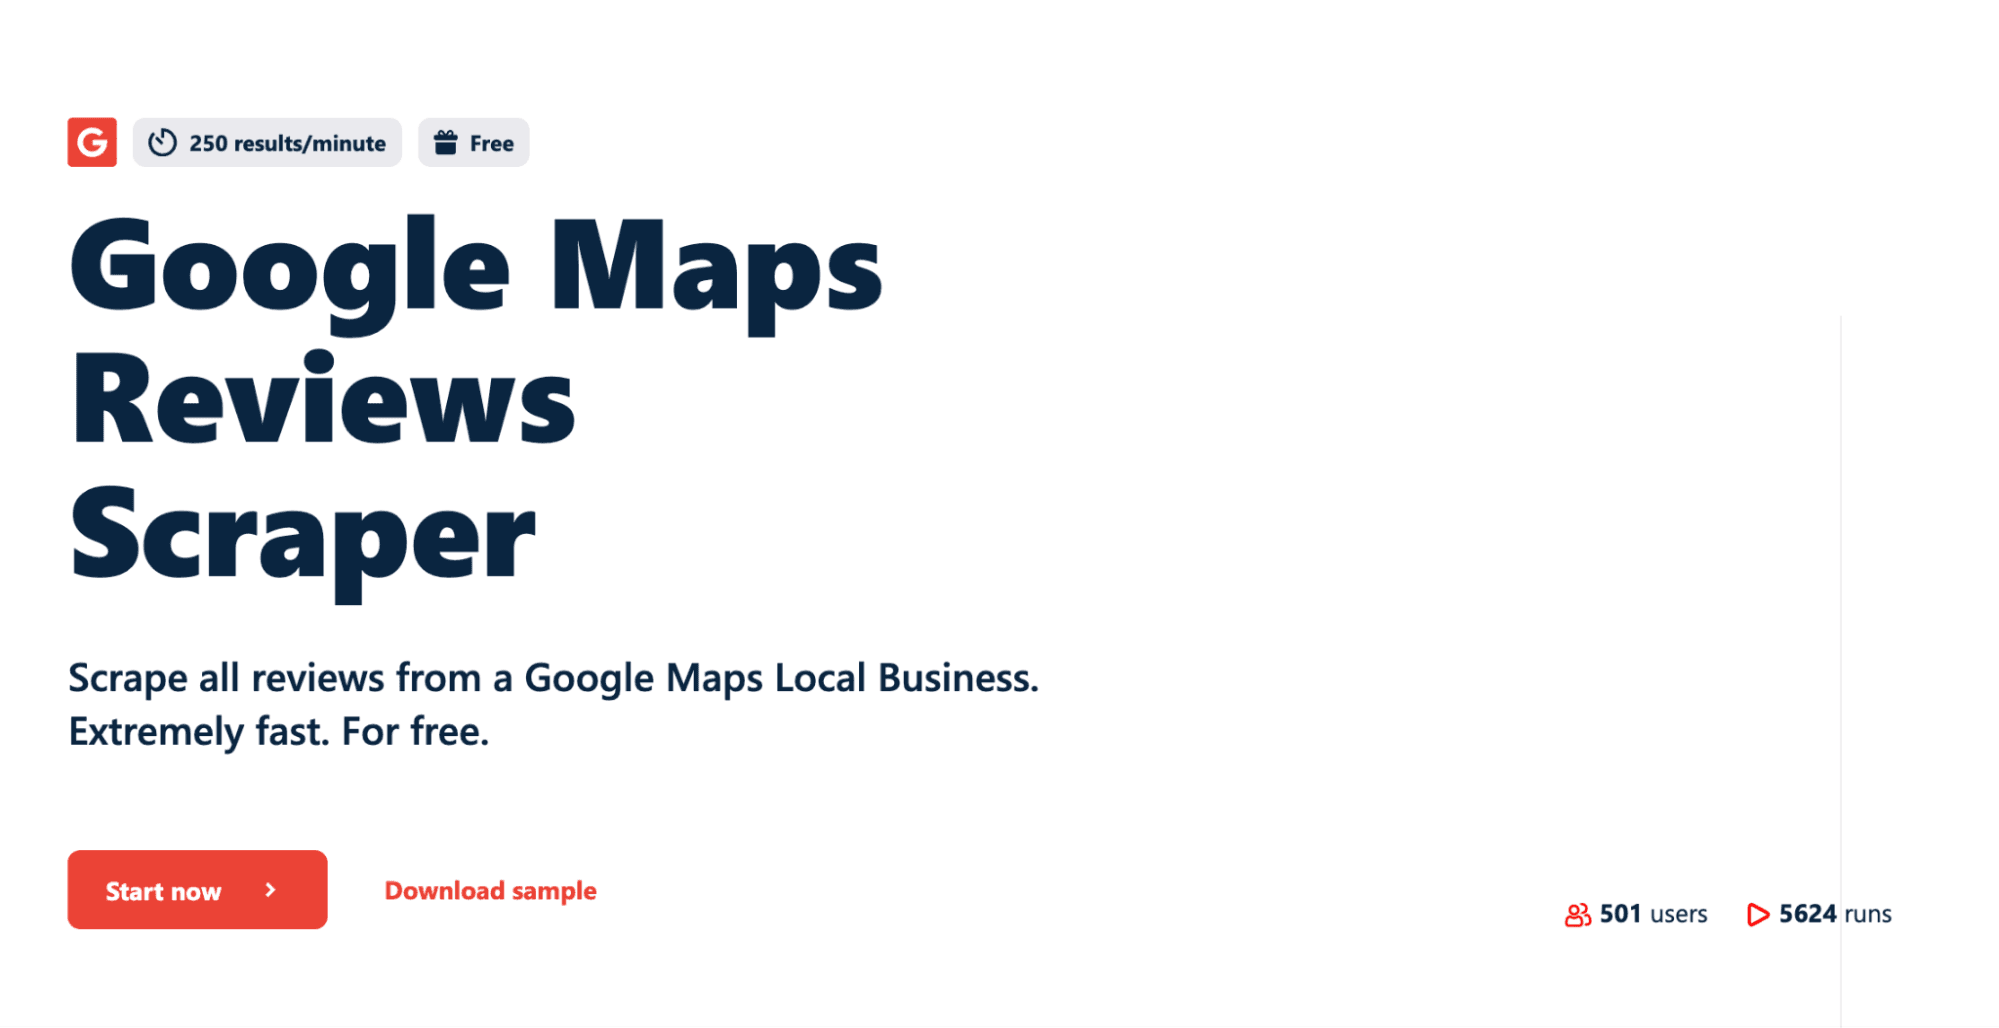 google maps reviews scraper lobstr product page - image6.png